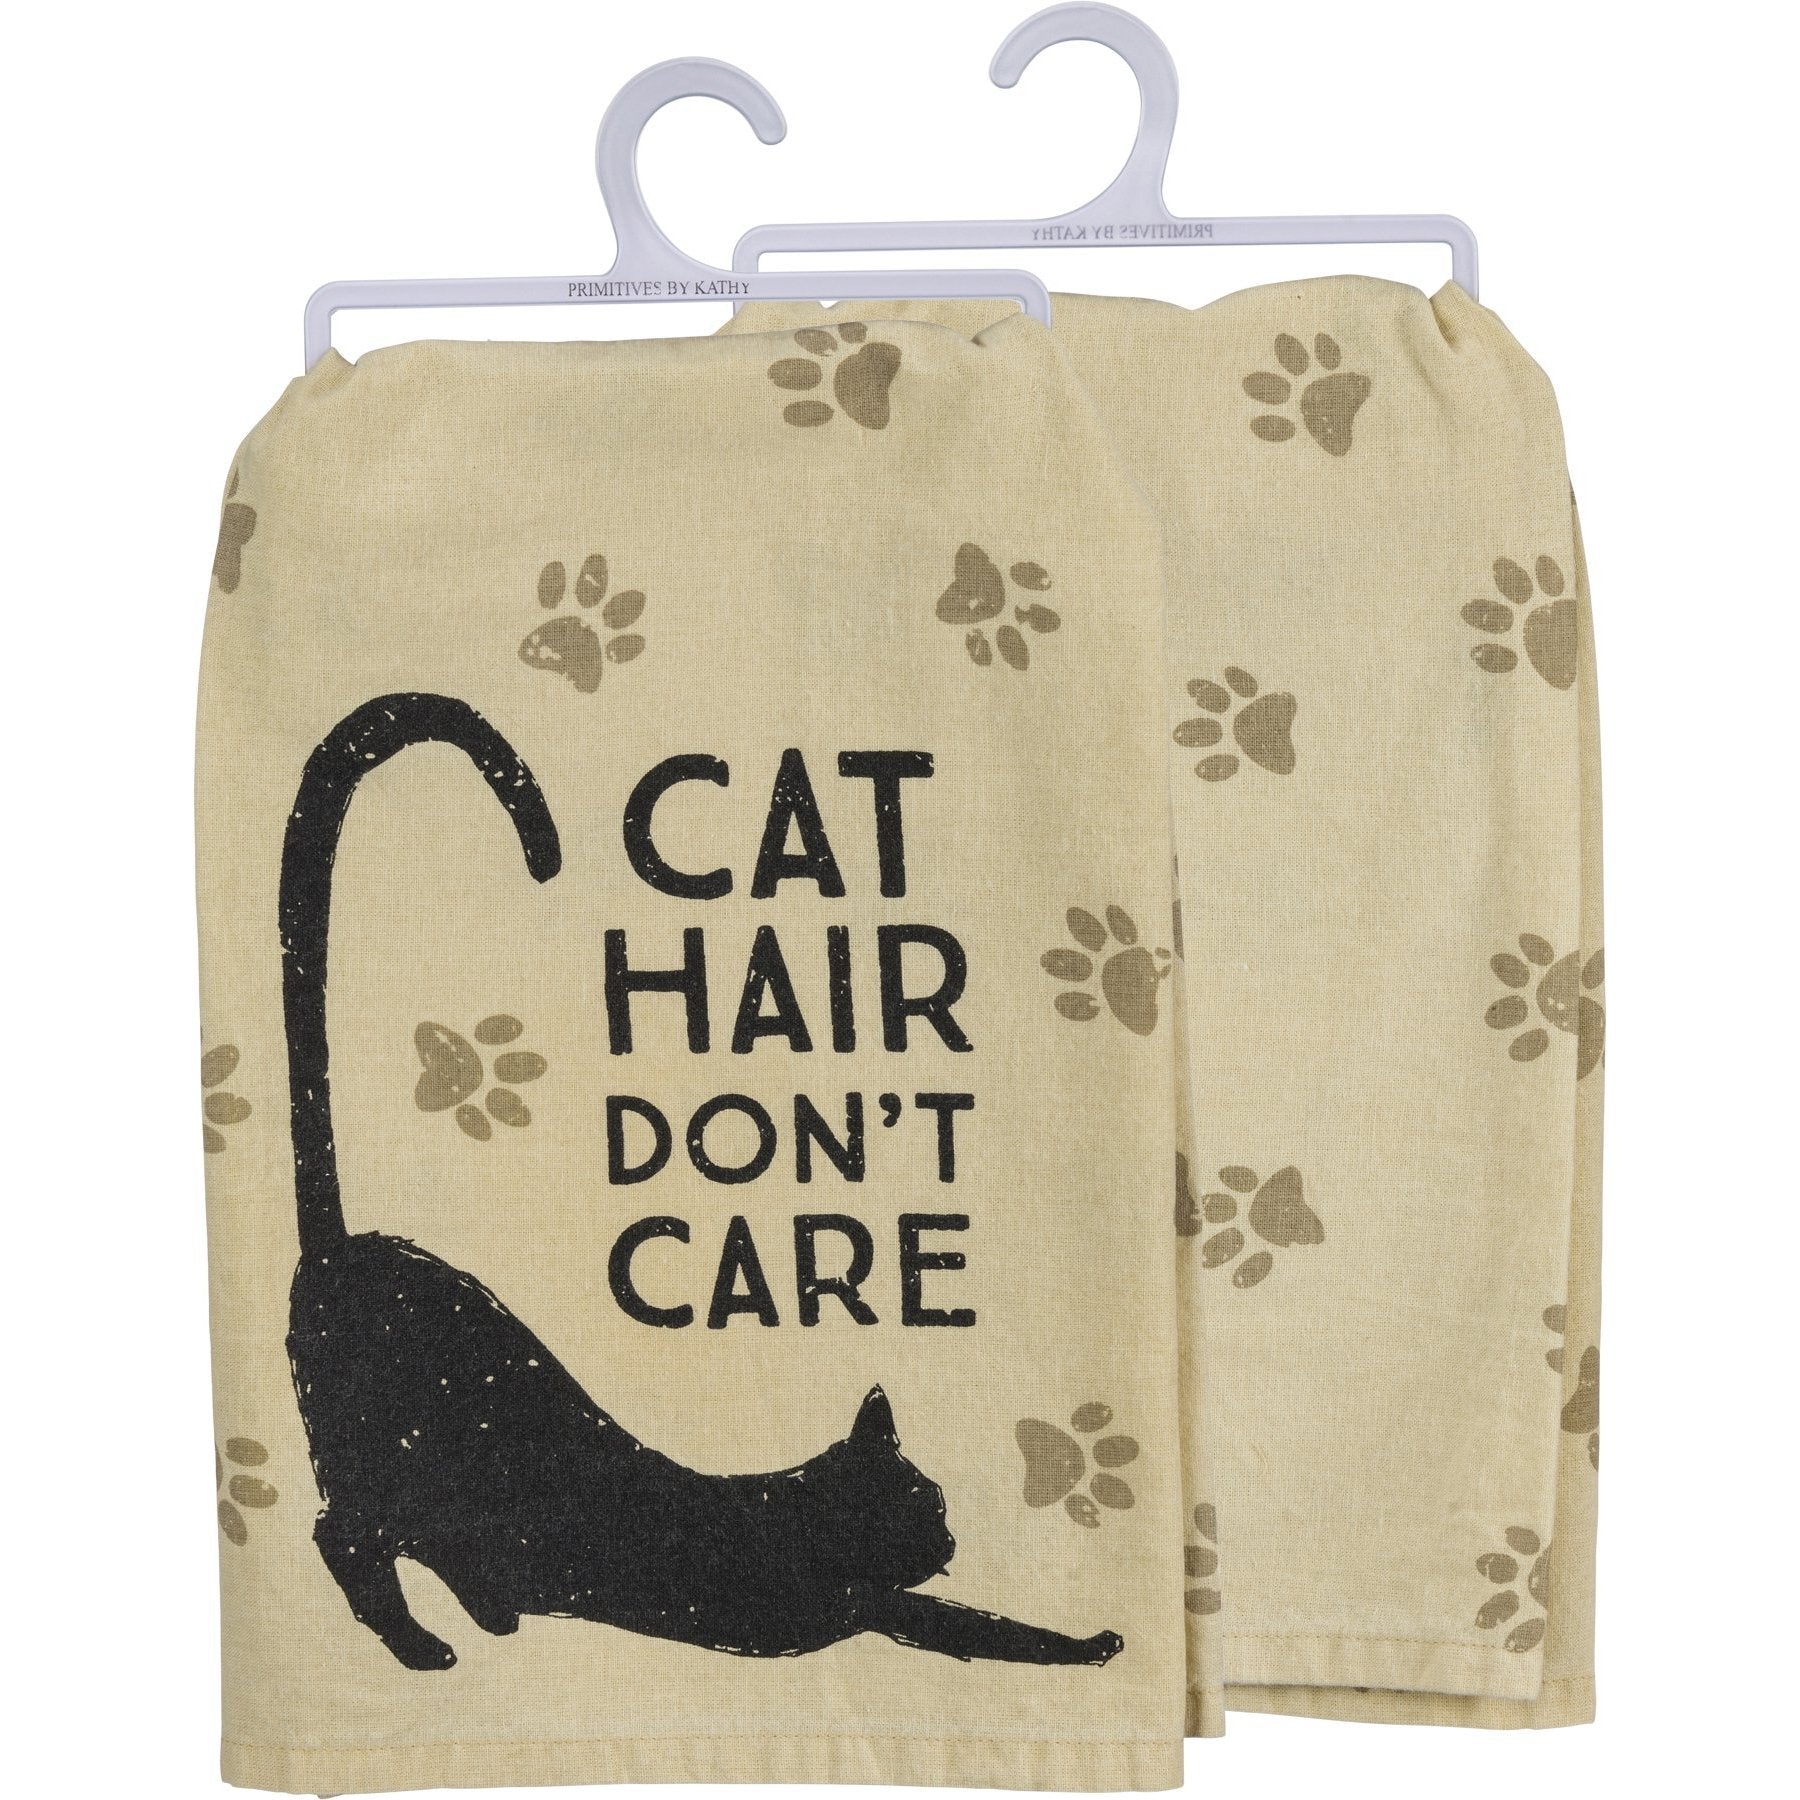 Unique Gifts for Cat Lovers, Cat Themed Dish Towel Featuring A Black Cat And The Phrase "Cat Hair Don't Care"